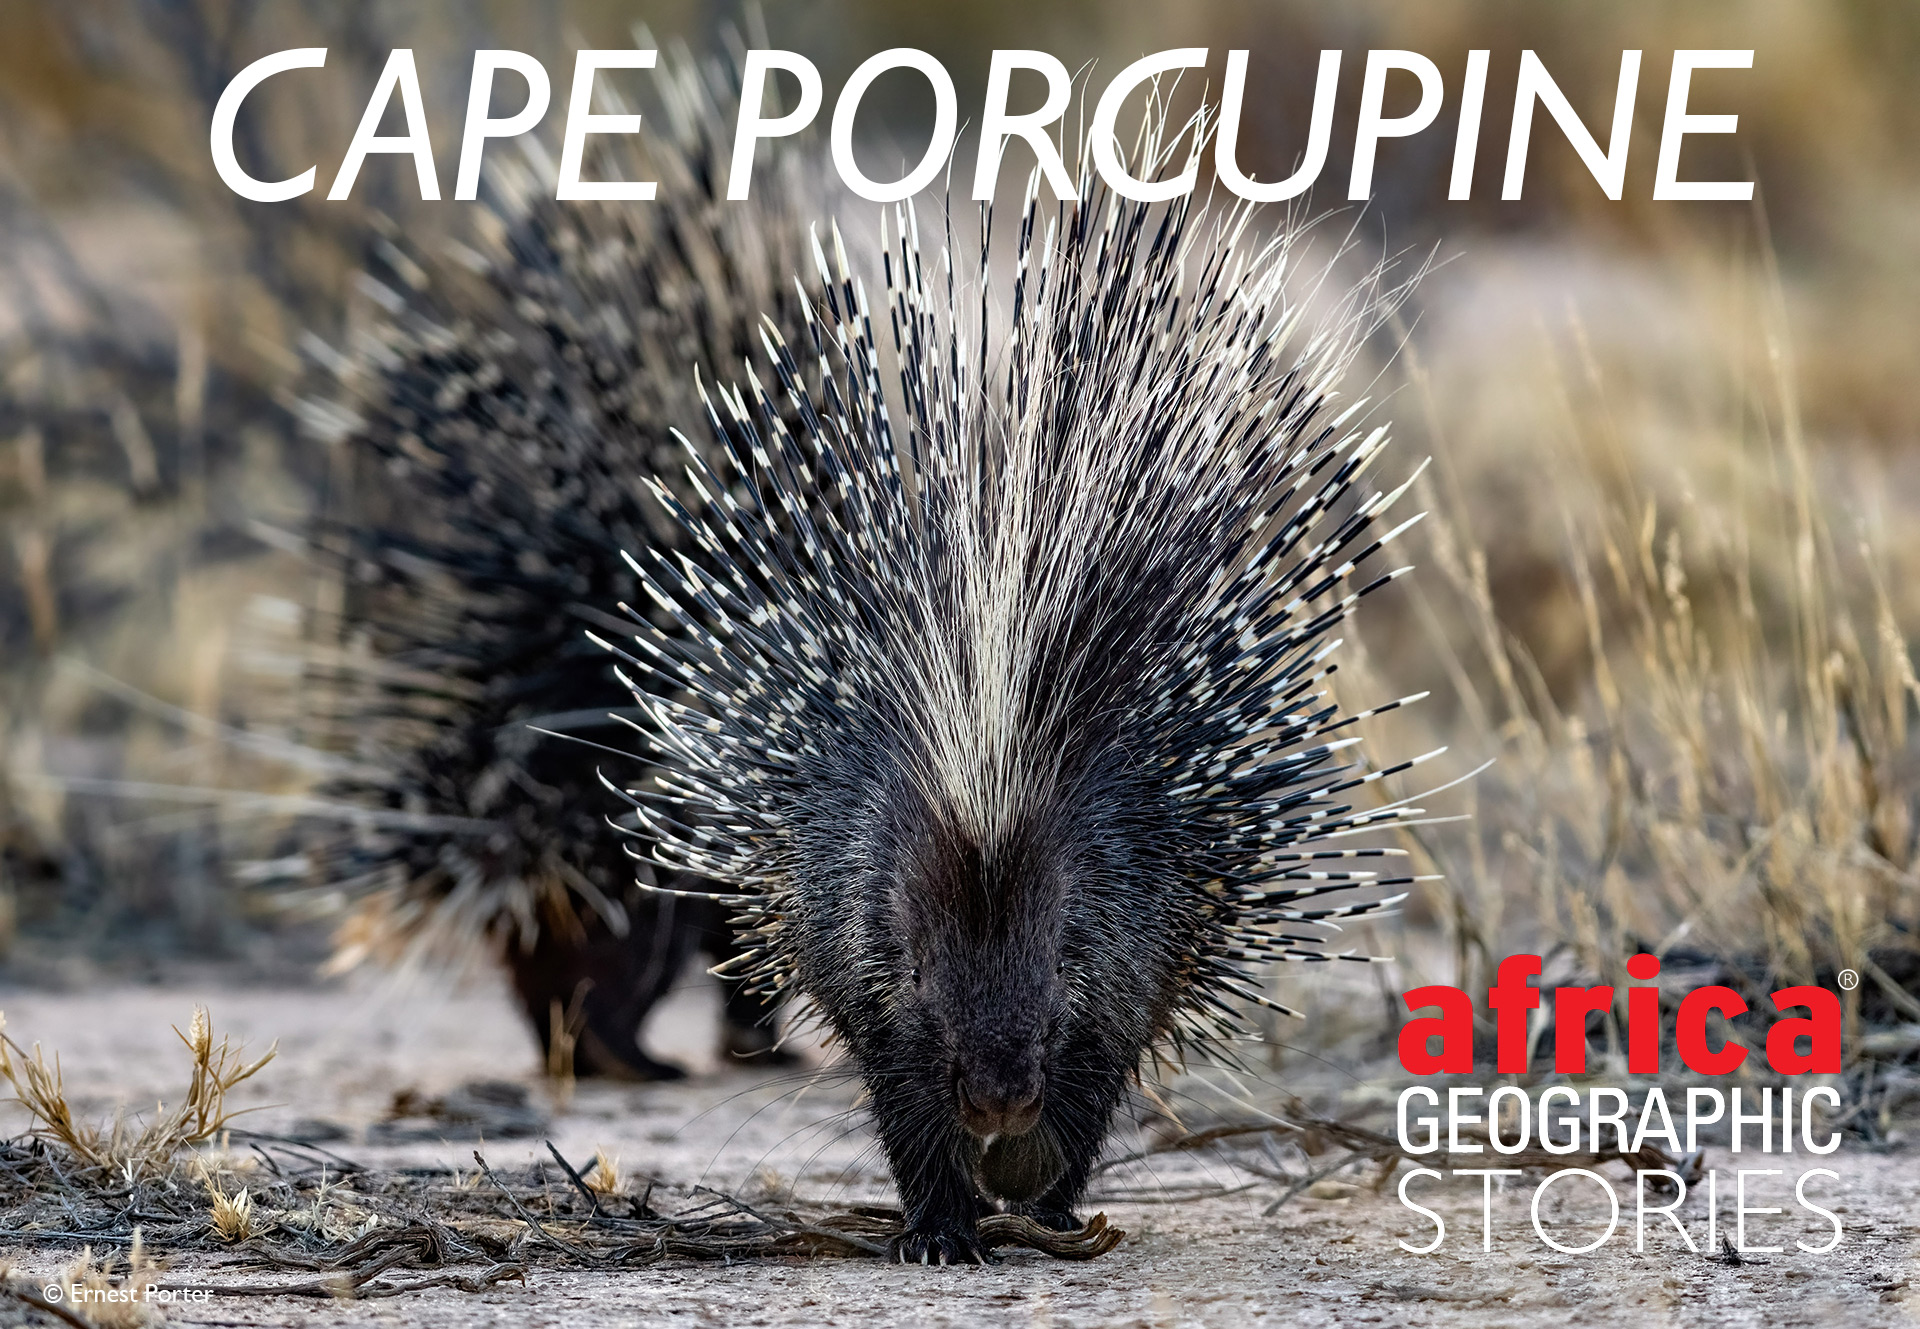 Cape porcupine - Africa Geographic